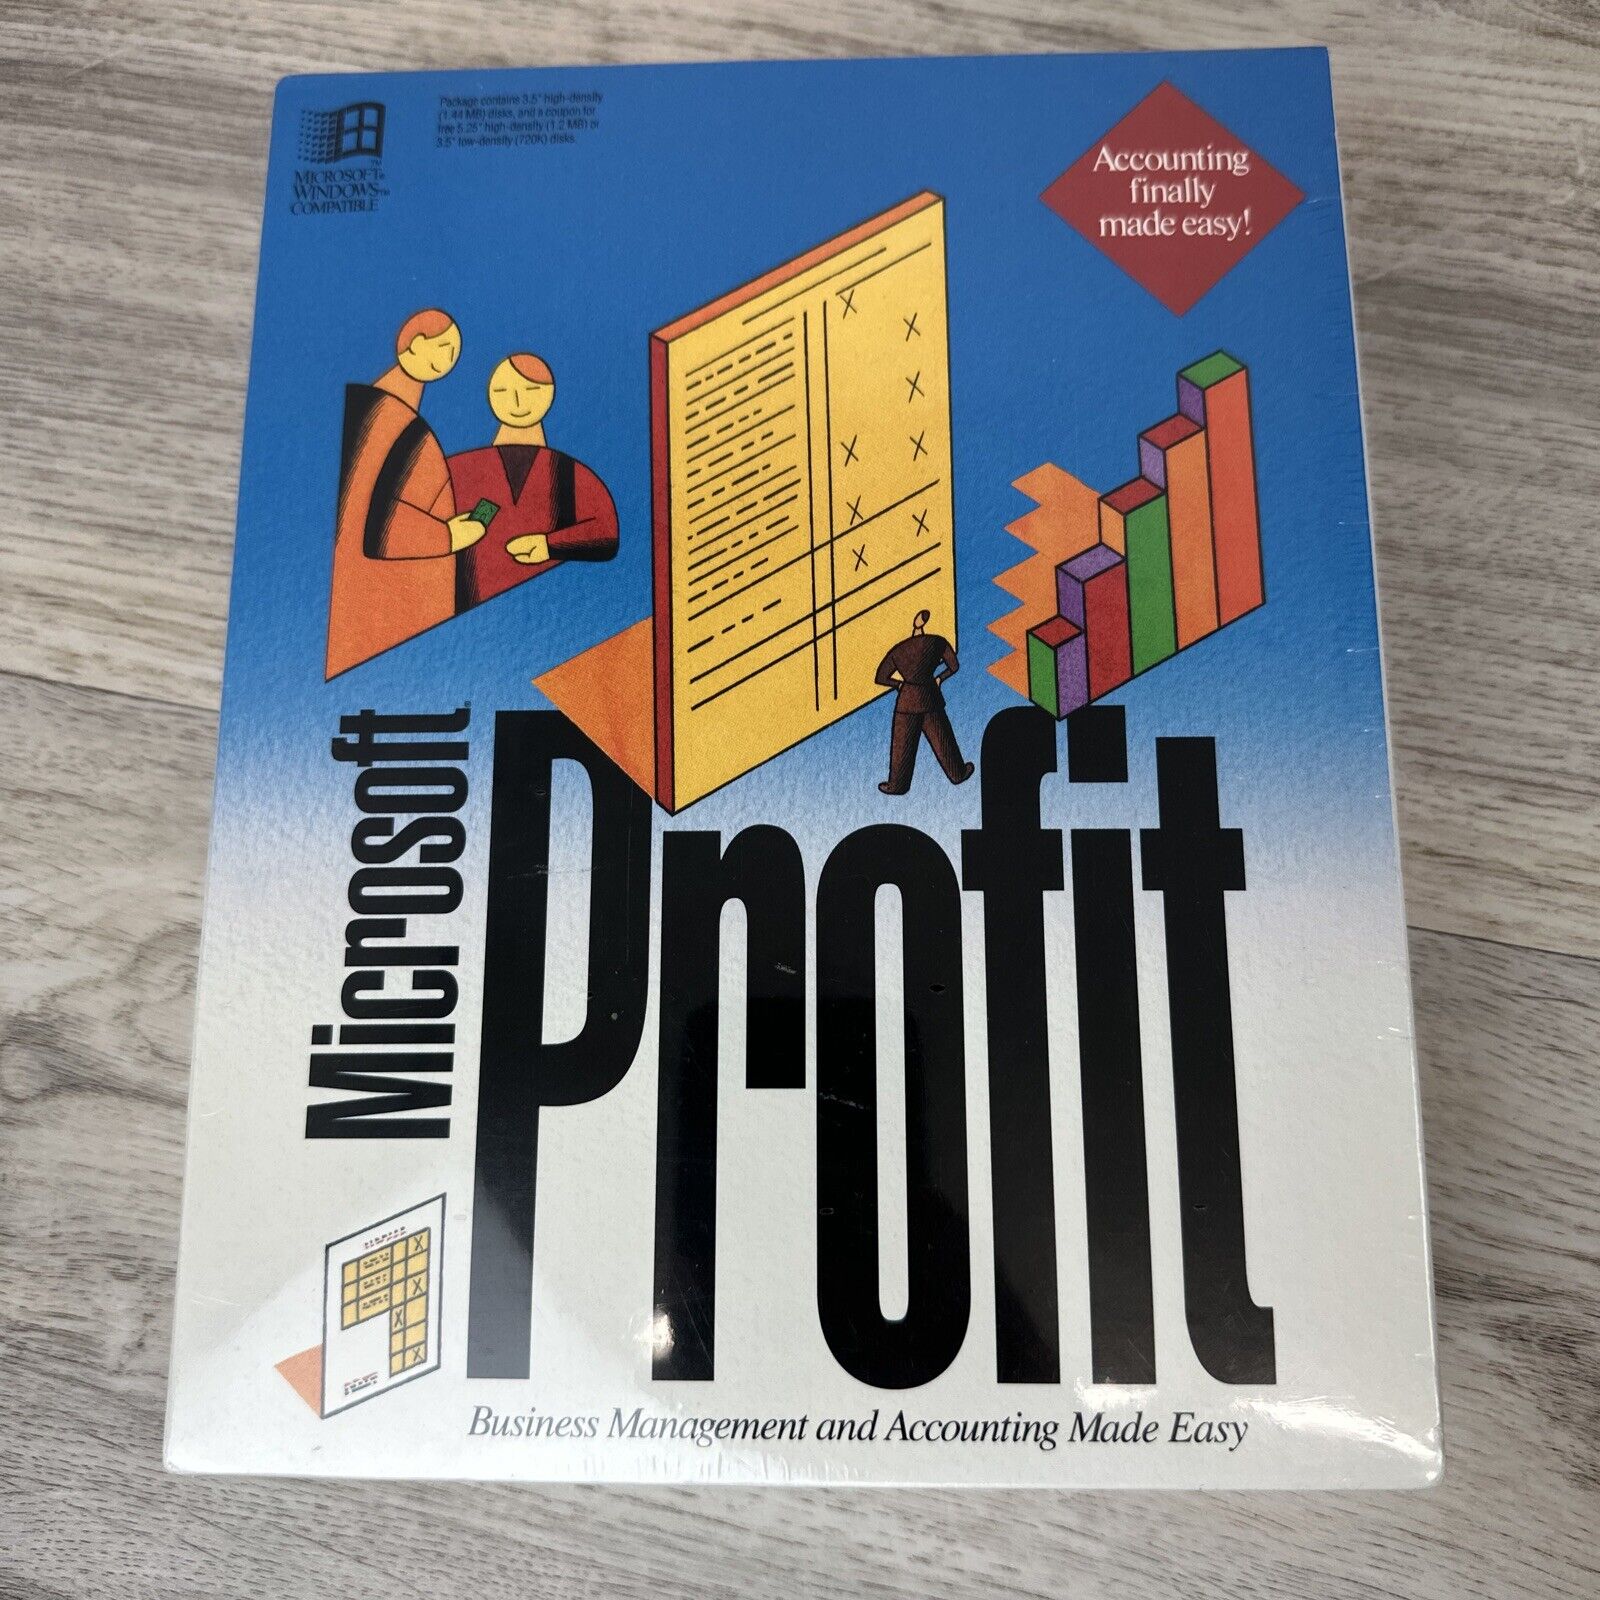 Rare SEALED Microsoft Profit Business Management Accounting Software DOS Windows